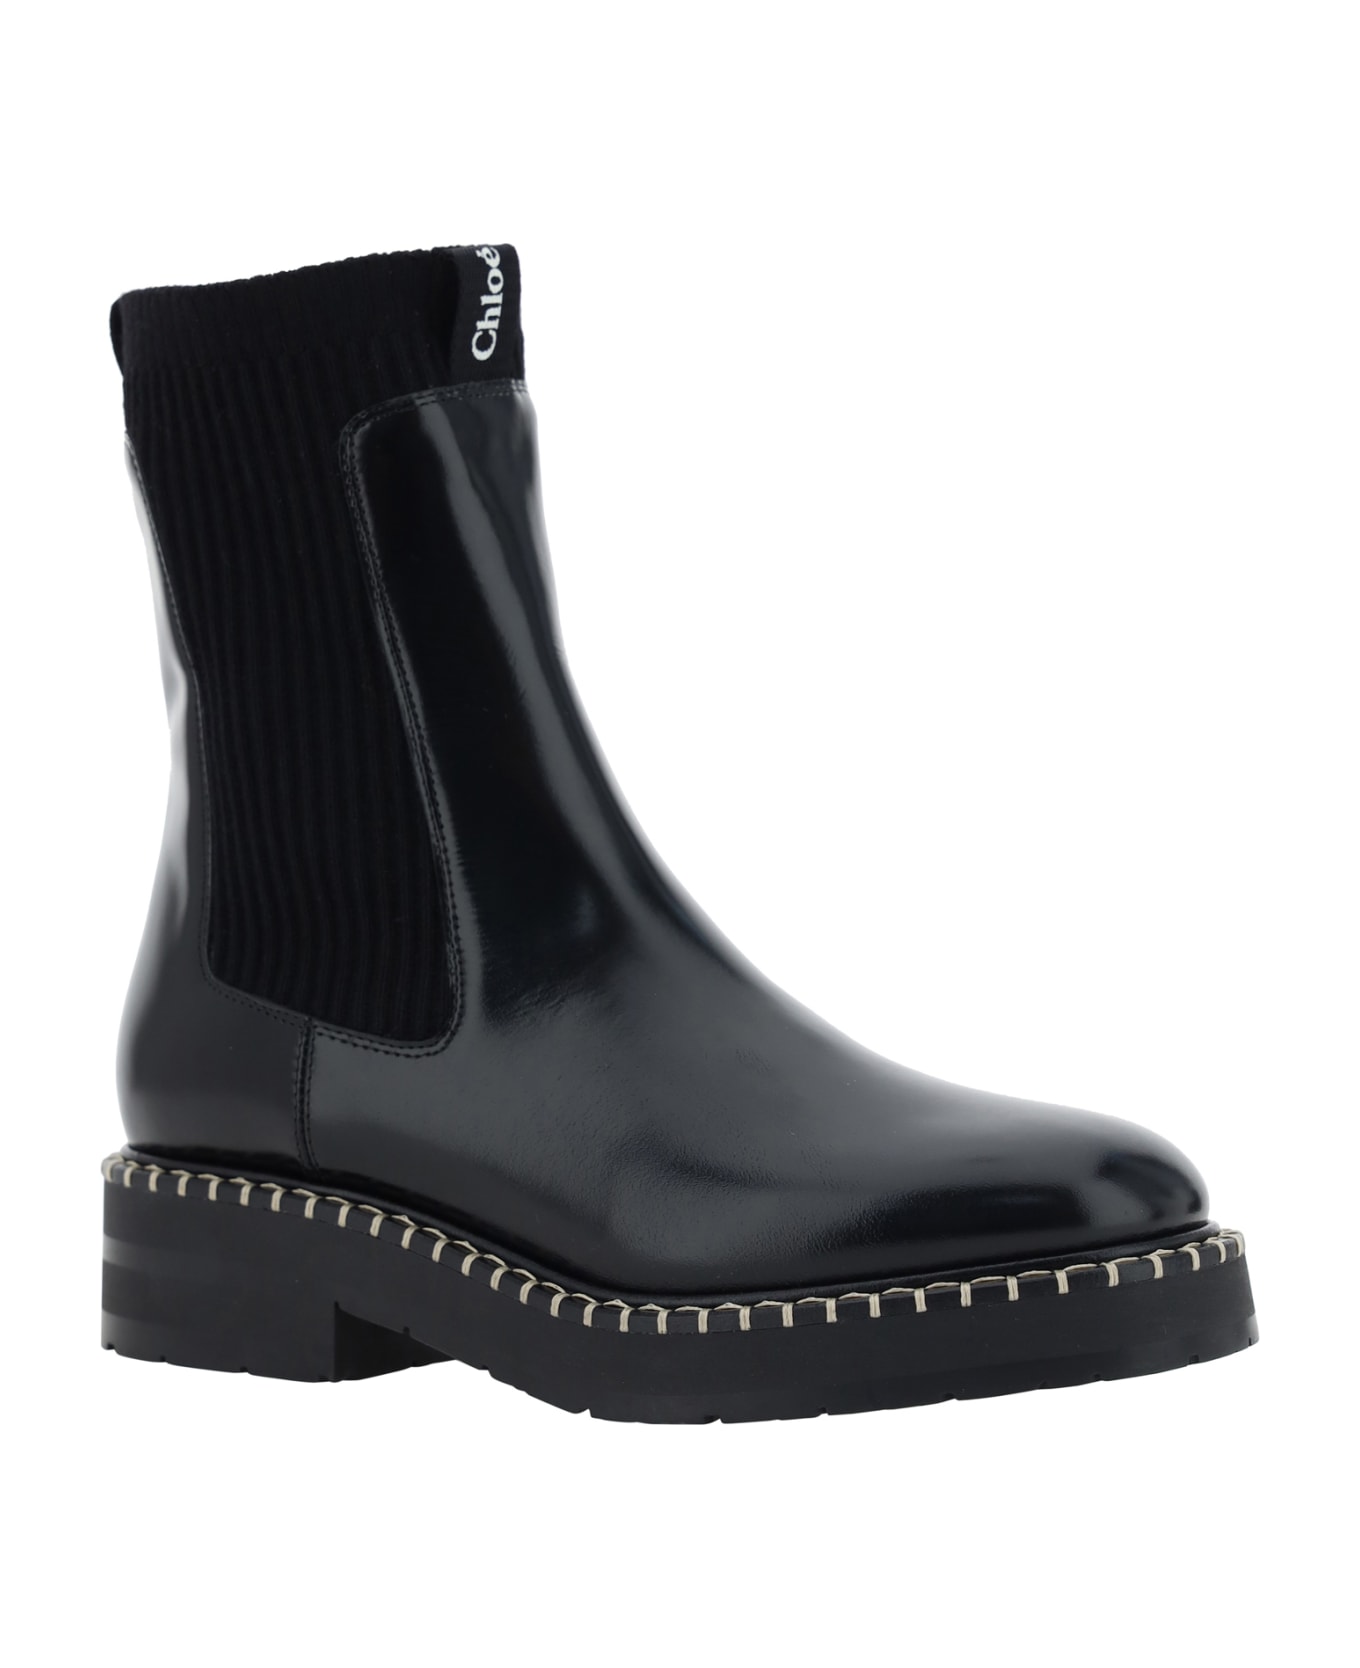 Chloé Glossy Ankle Boots - Black